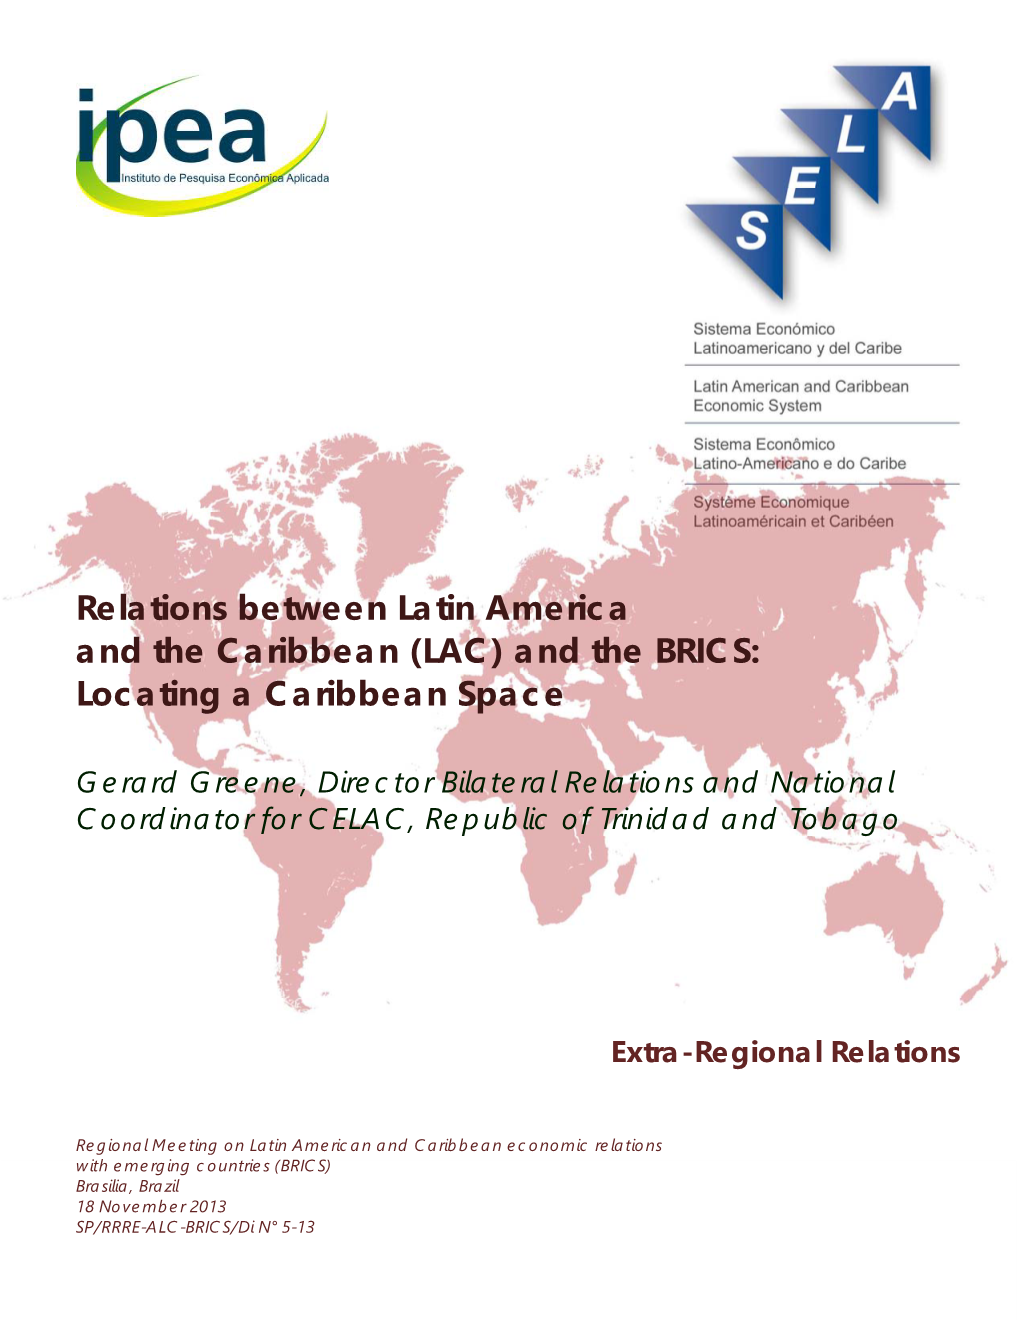 Relations Between Latin America and the Caribbean (LAC) and the BRICS: Locating a Caribbean Space